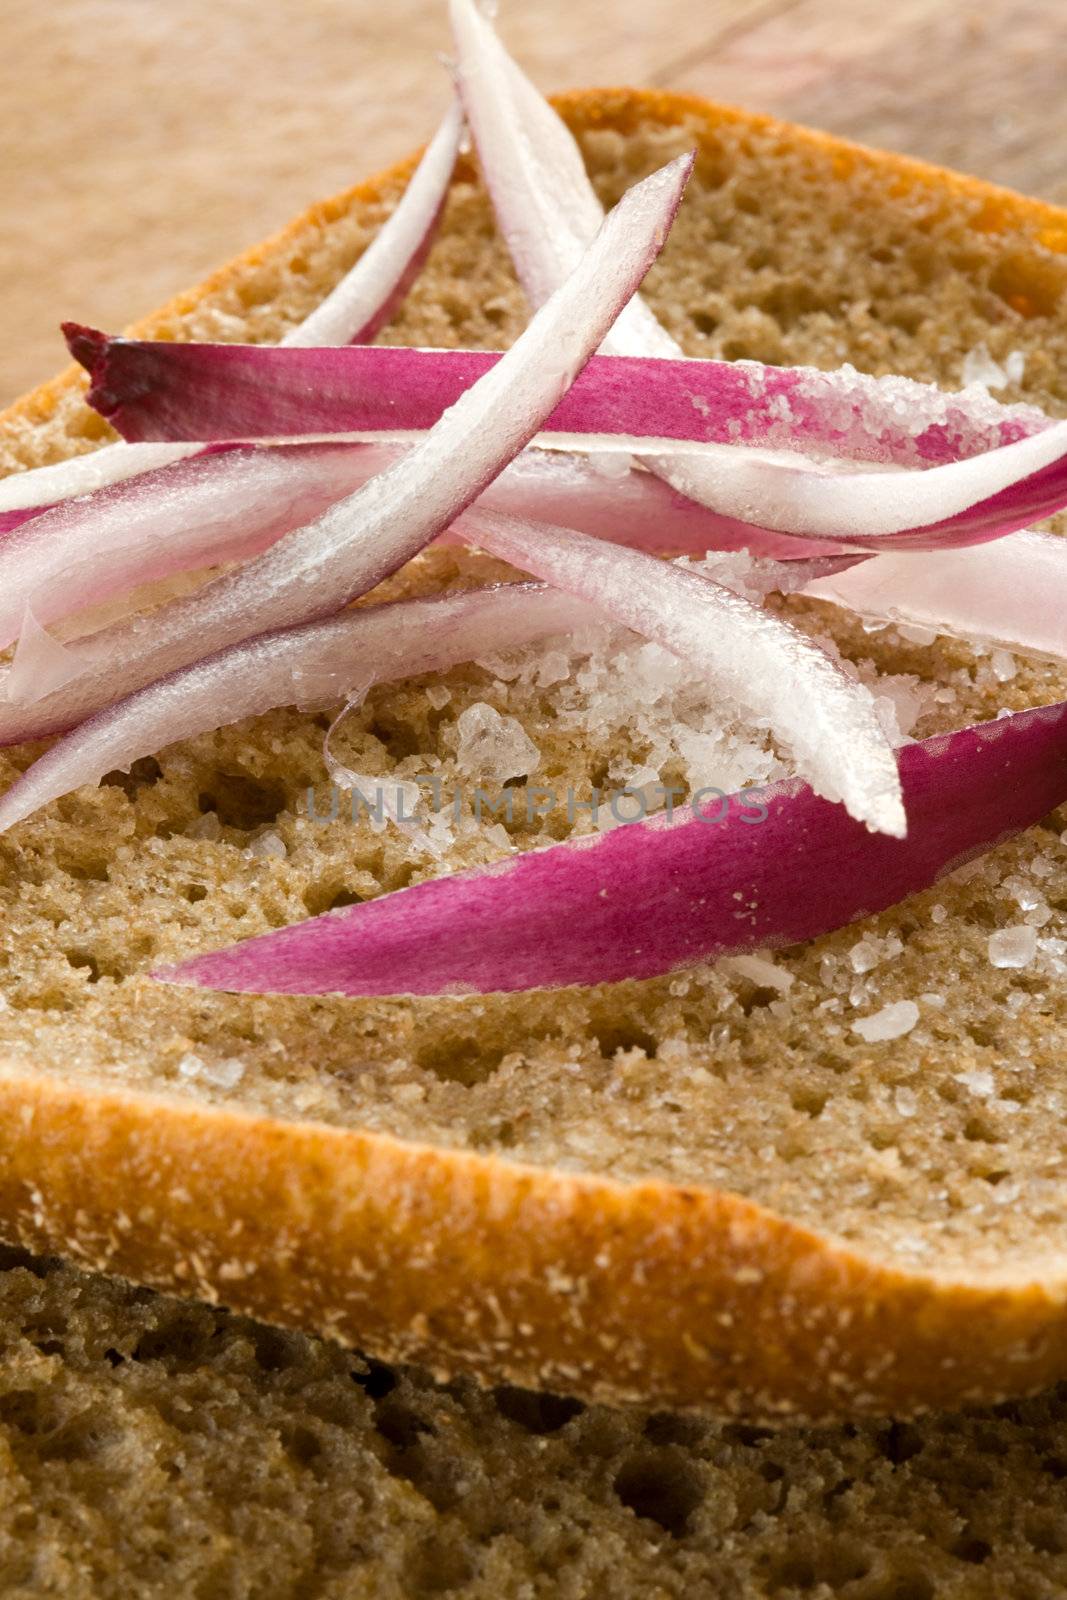 Sliced bread with some slice of onion